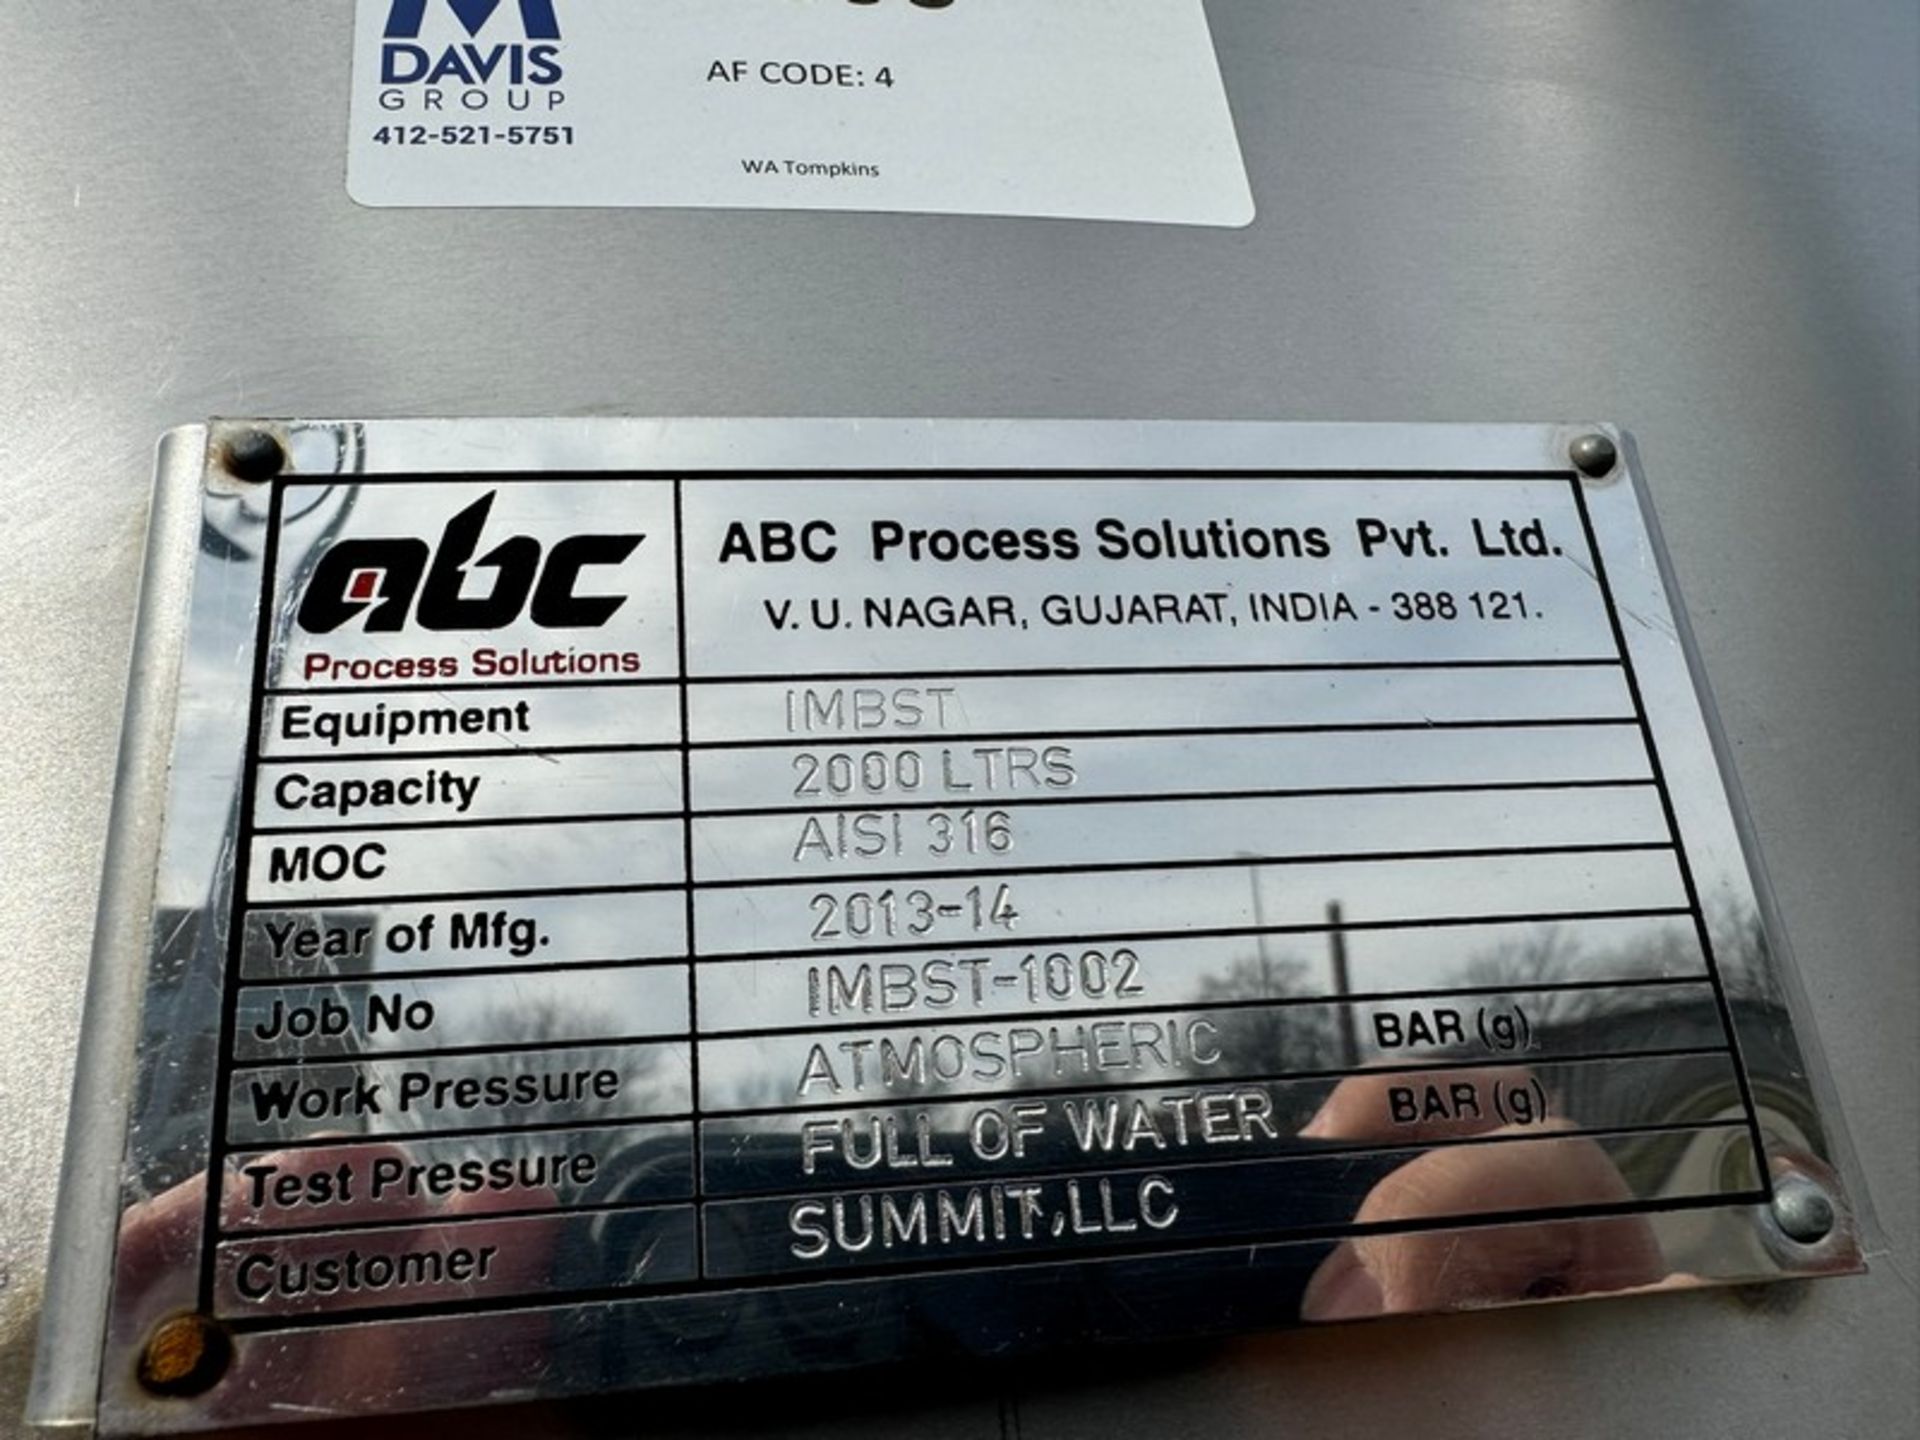 2013-2014 ABC Process Solutions 2,000 LTRS S/S Vertical Butter Tank II, MOC AISI 316, Job No. - Image 9 of 9